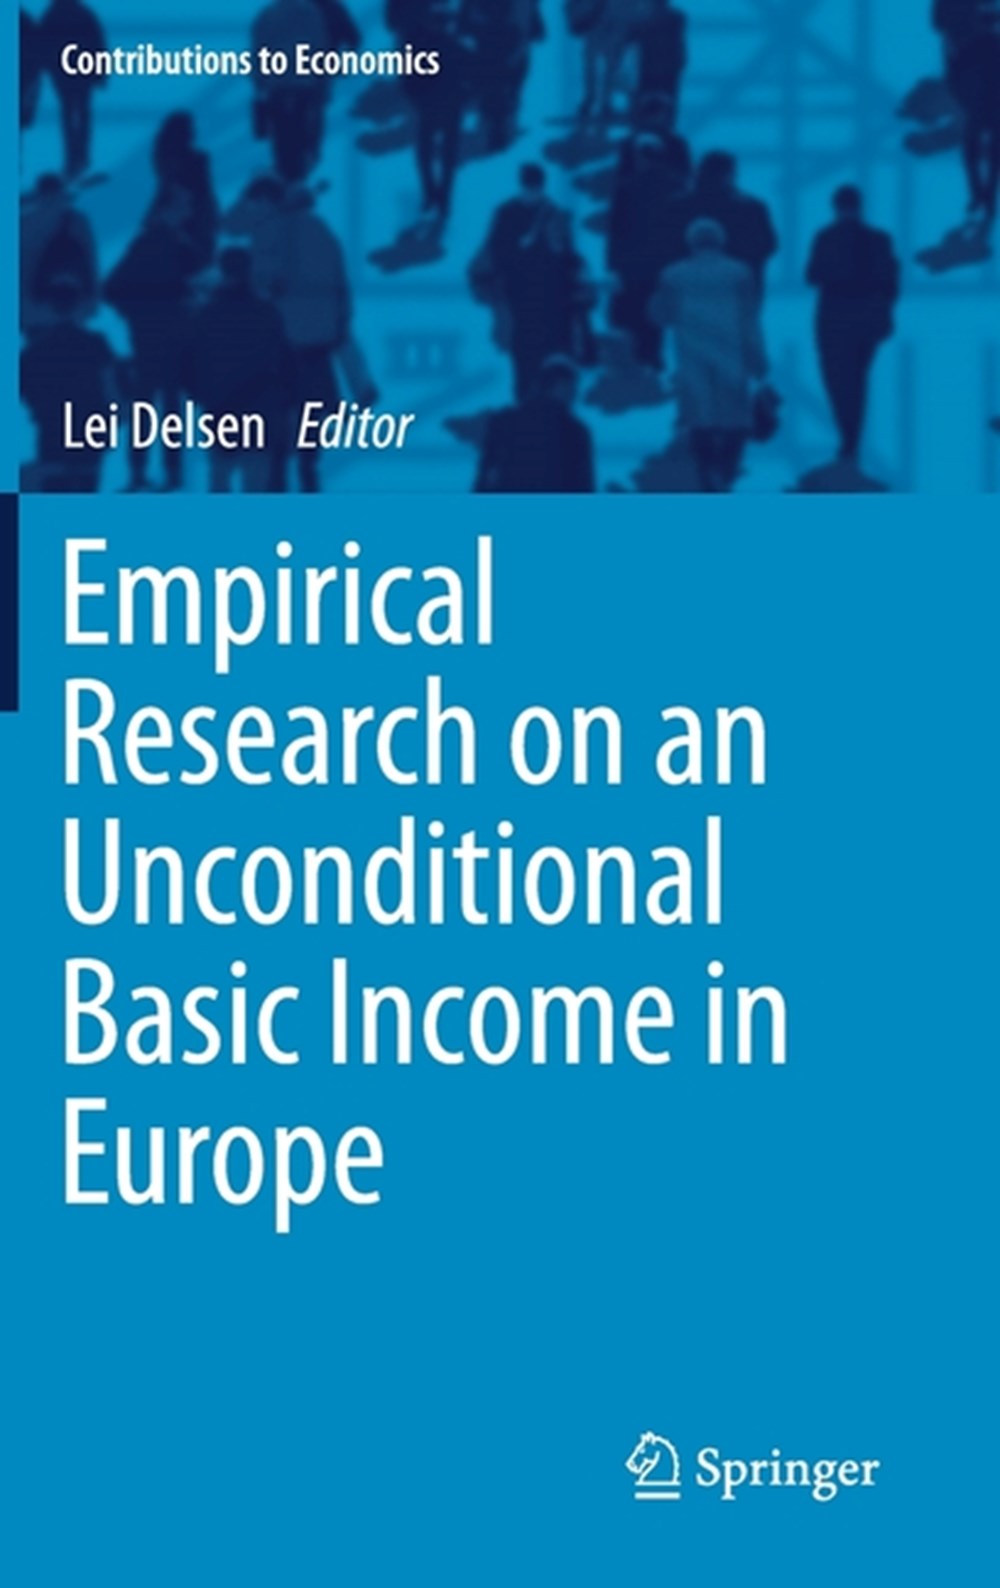 Empirical Research on an Unconditional Basic Income in Europe (2019)